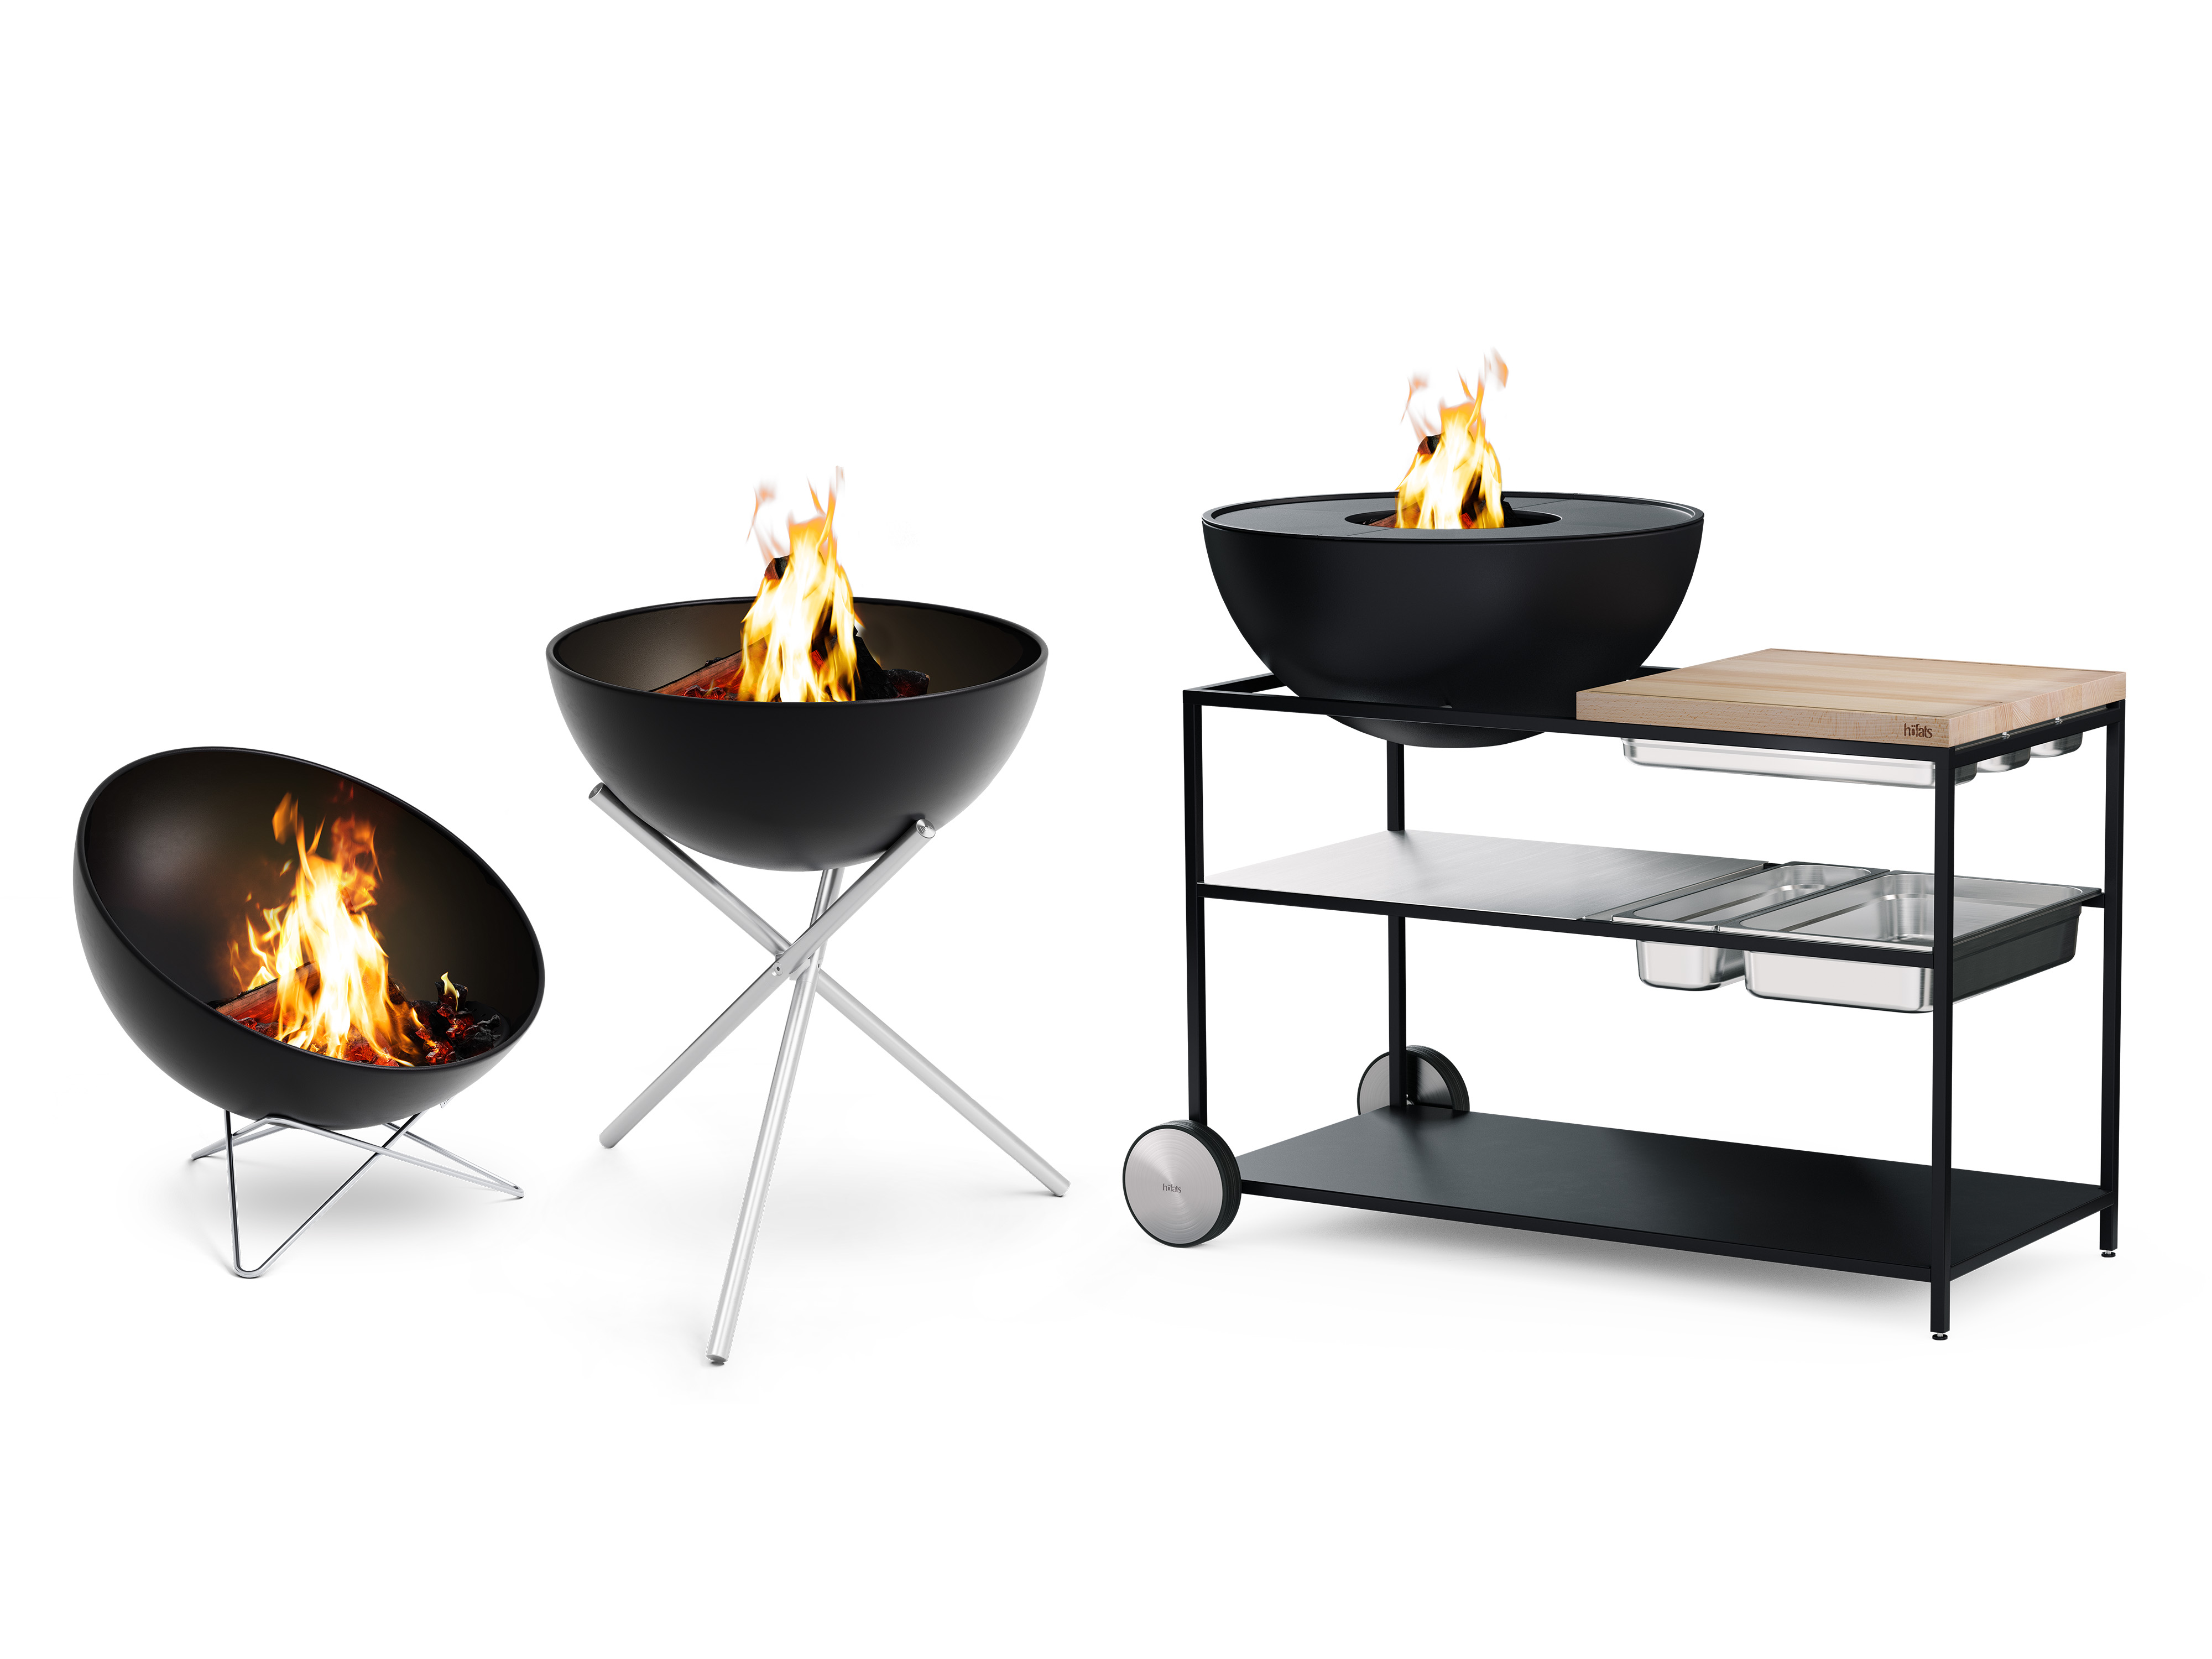 BOWL Modular Fire Bowl, Barbecue & Outdoor Kitchen